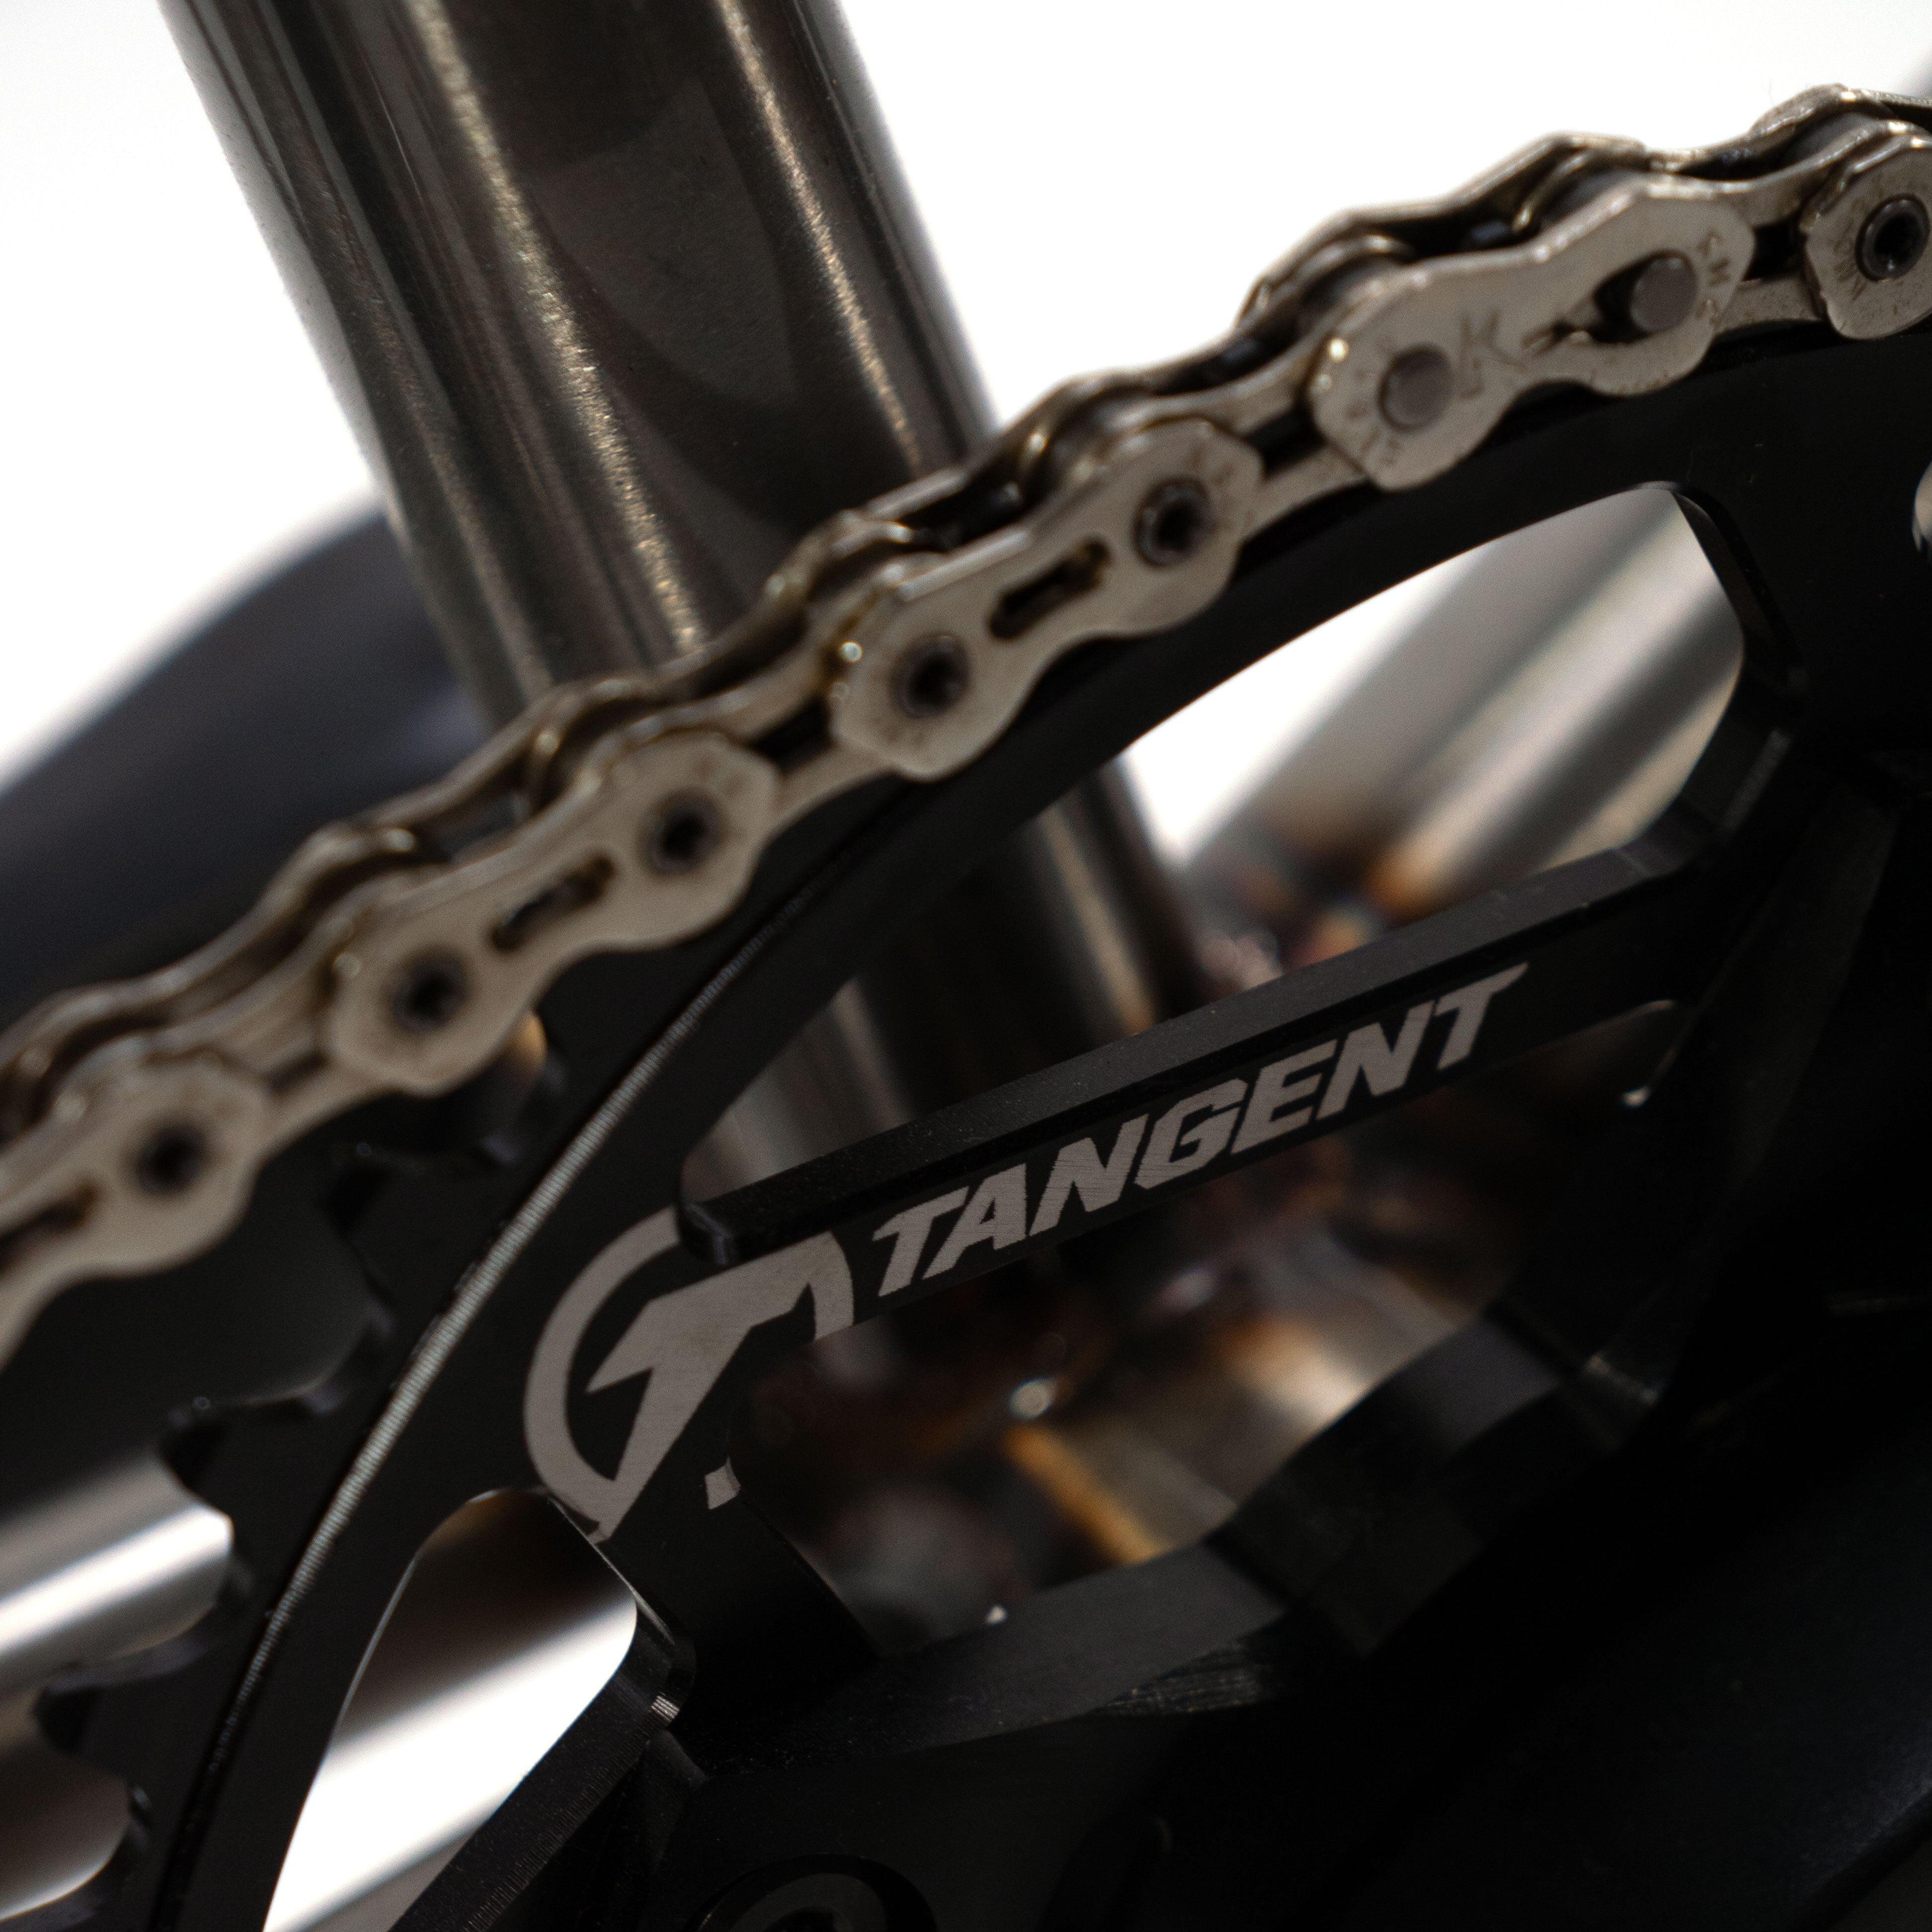 A close up of a Cult Vick Behm Custom Race Bike chain with the word tangent on it.